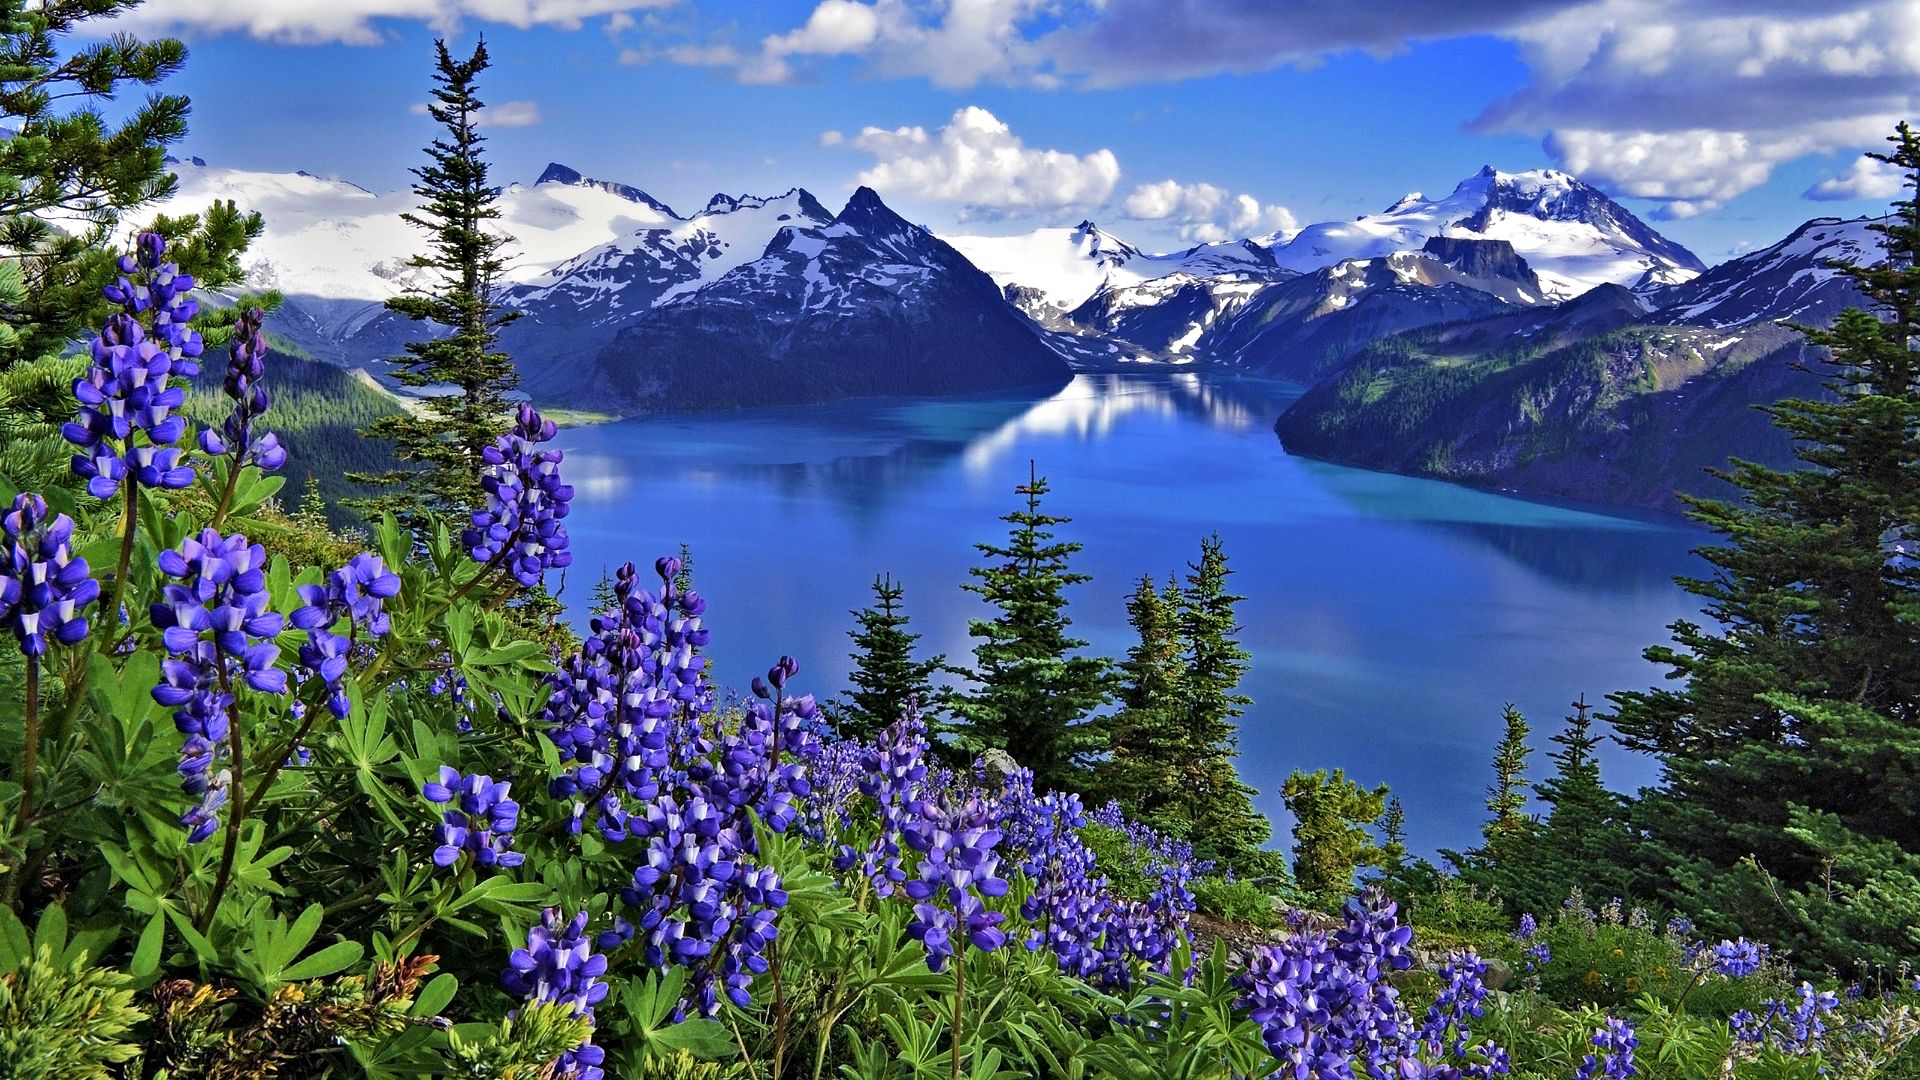 Hd The Beauty Of Nature Wallpaper - Spring Flowers And Mountains , HD Wallpaper & Backgrounds